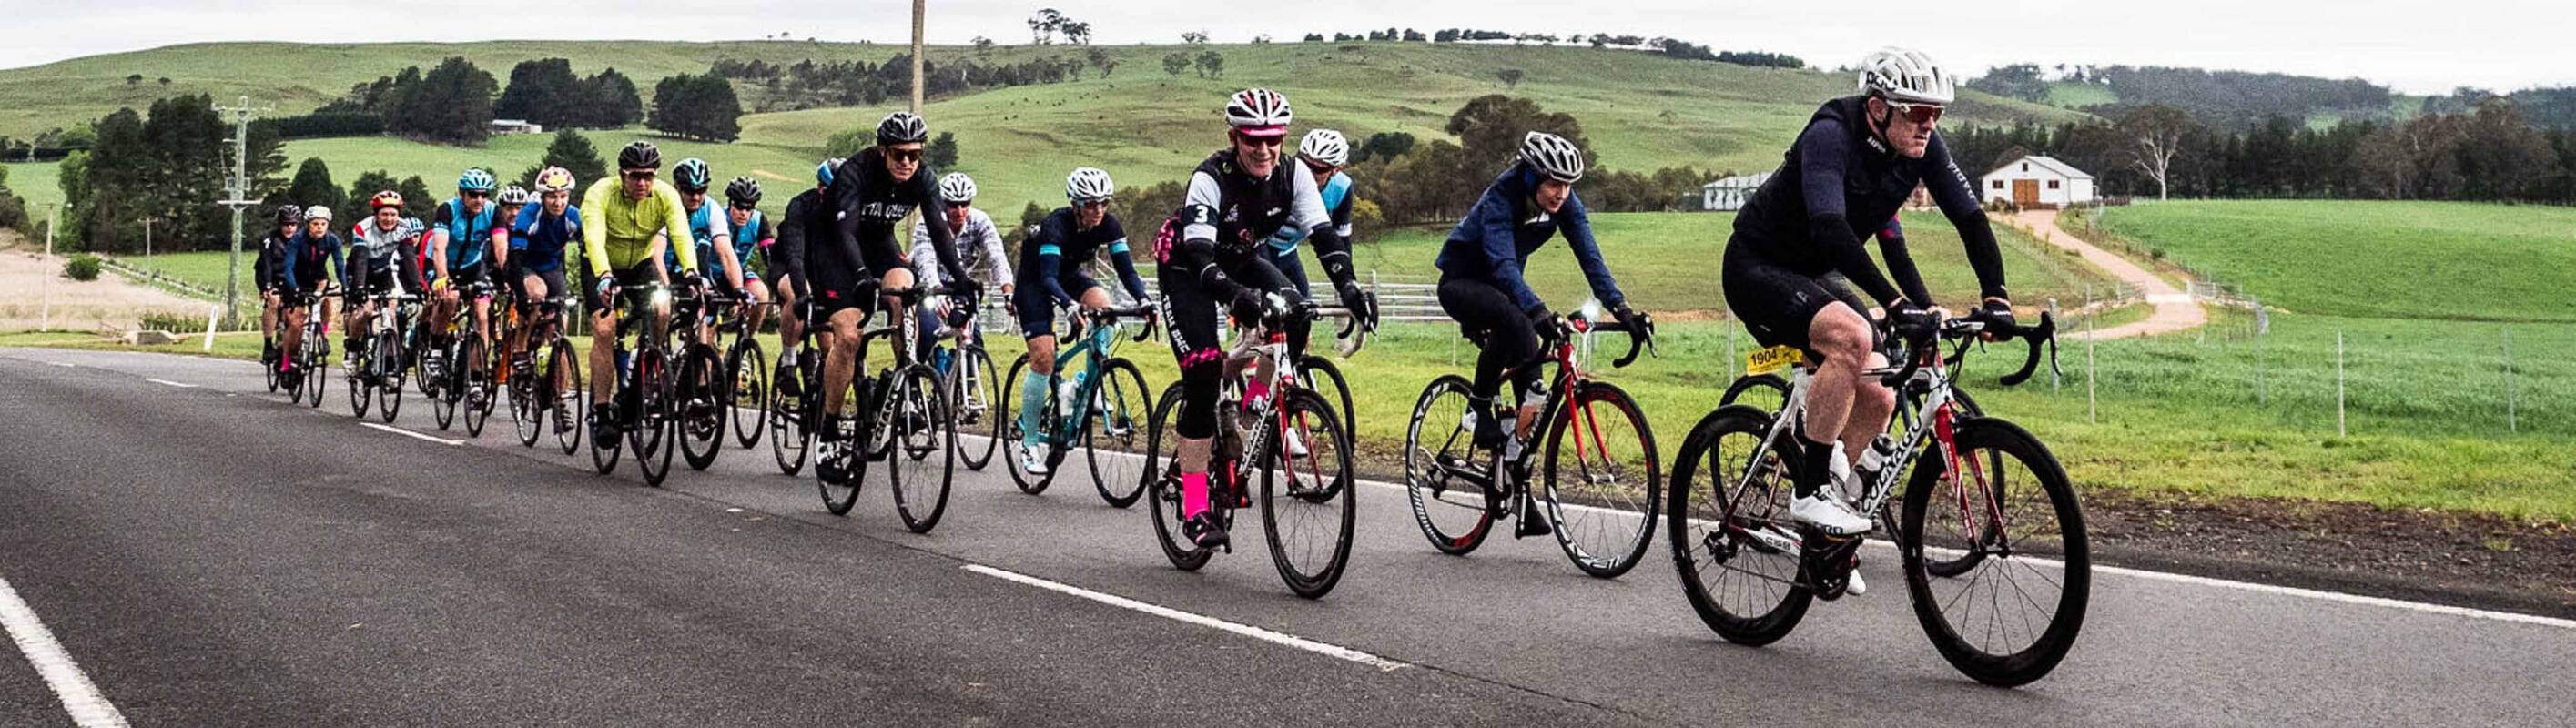 Bowral Classic cycling event